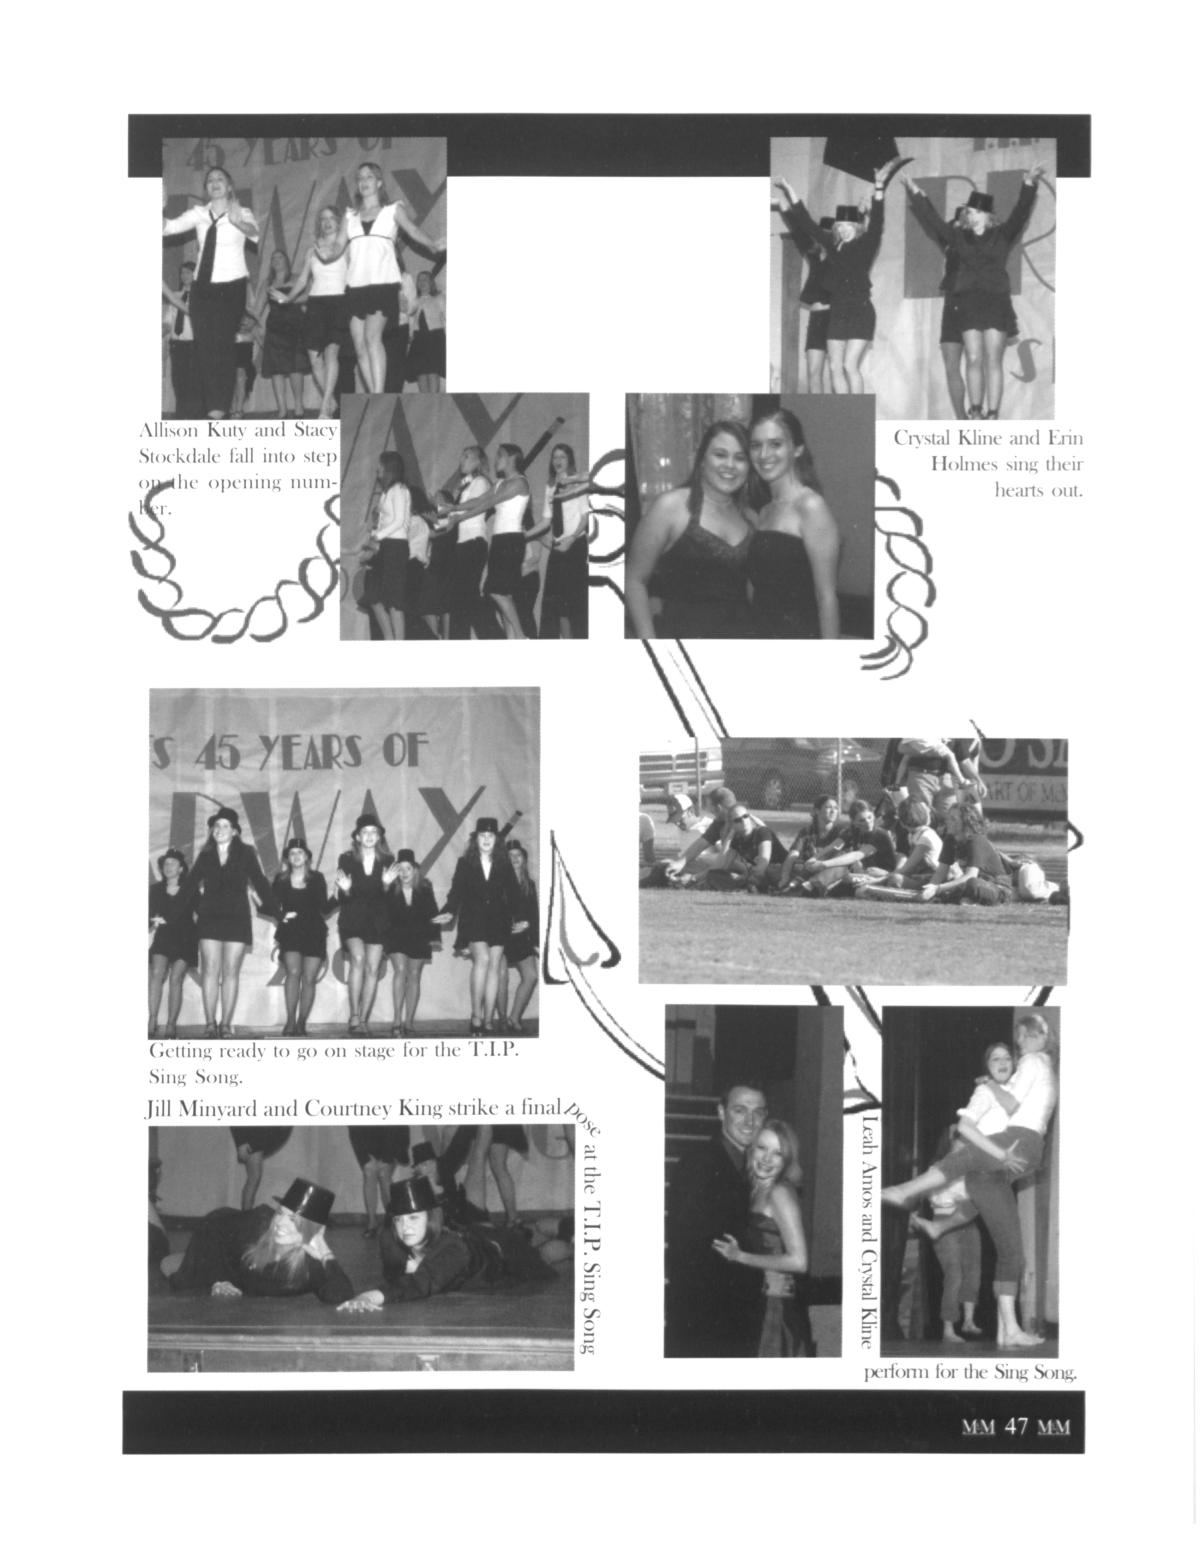 The Totem, Yearbook of McMurry University, 2005
                                                
                                                    47
                                                